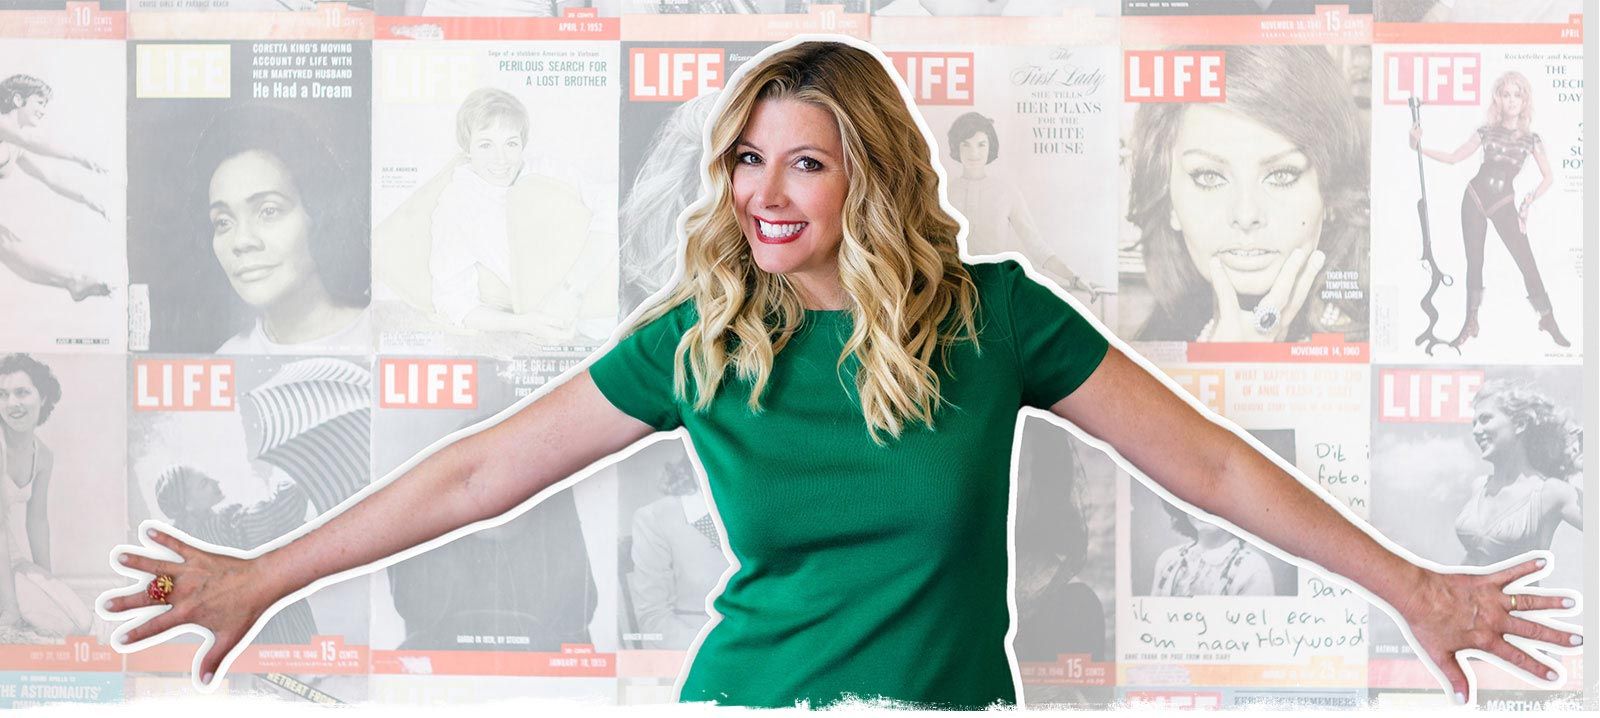 SPANX - Sara Blakely's version of the #HowItStarted challenge